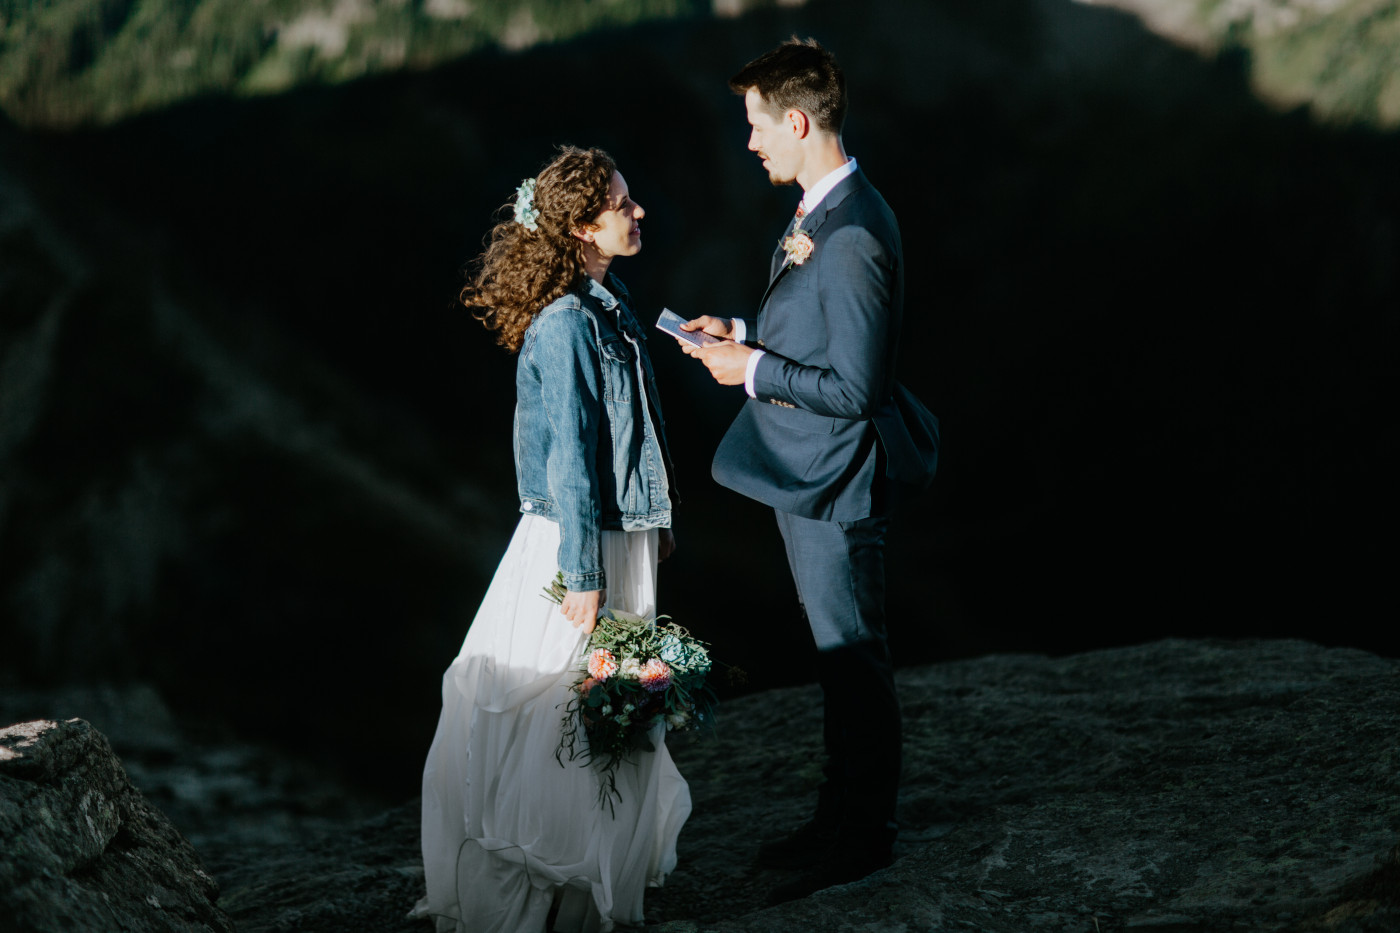 Tasha and Chad during their ceremony. Elopement photography at Mount Rainier by Sienna Plus Josh.